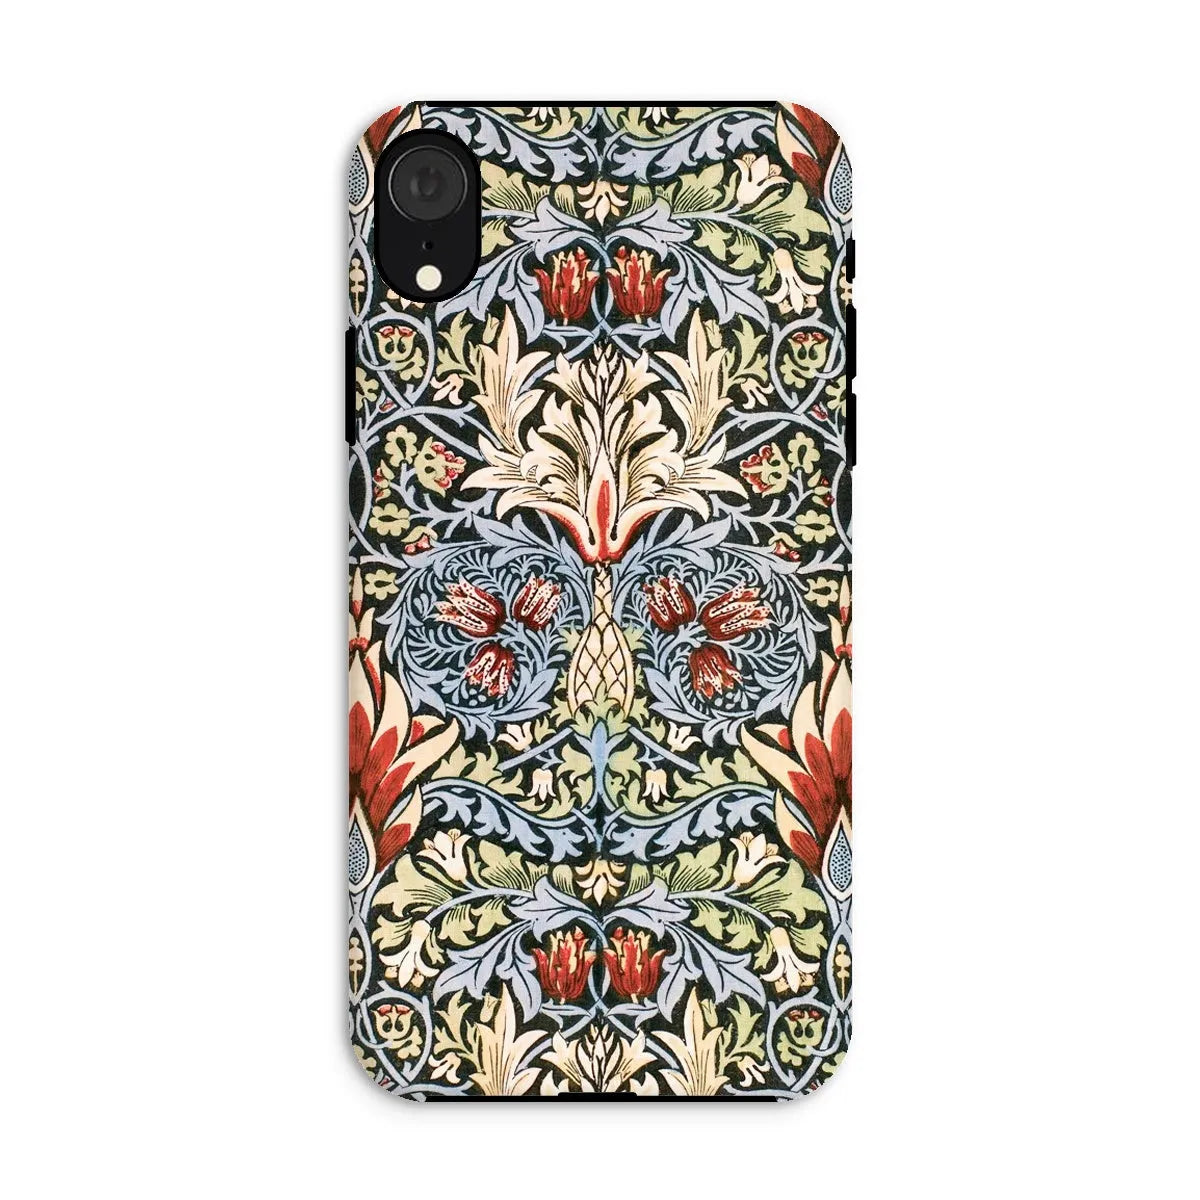 Snakeshead - Arts And Crafts Pattern Phone Case - William Morris - Iphone Xr / Matte - Mobile Phone Cases - Aesthetic